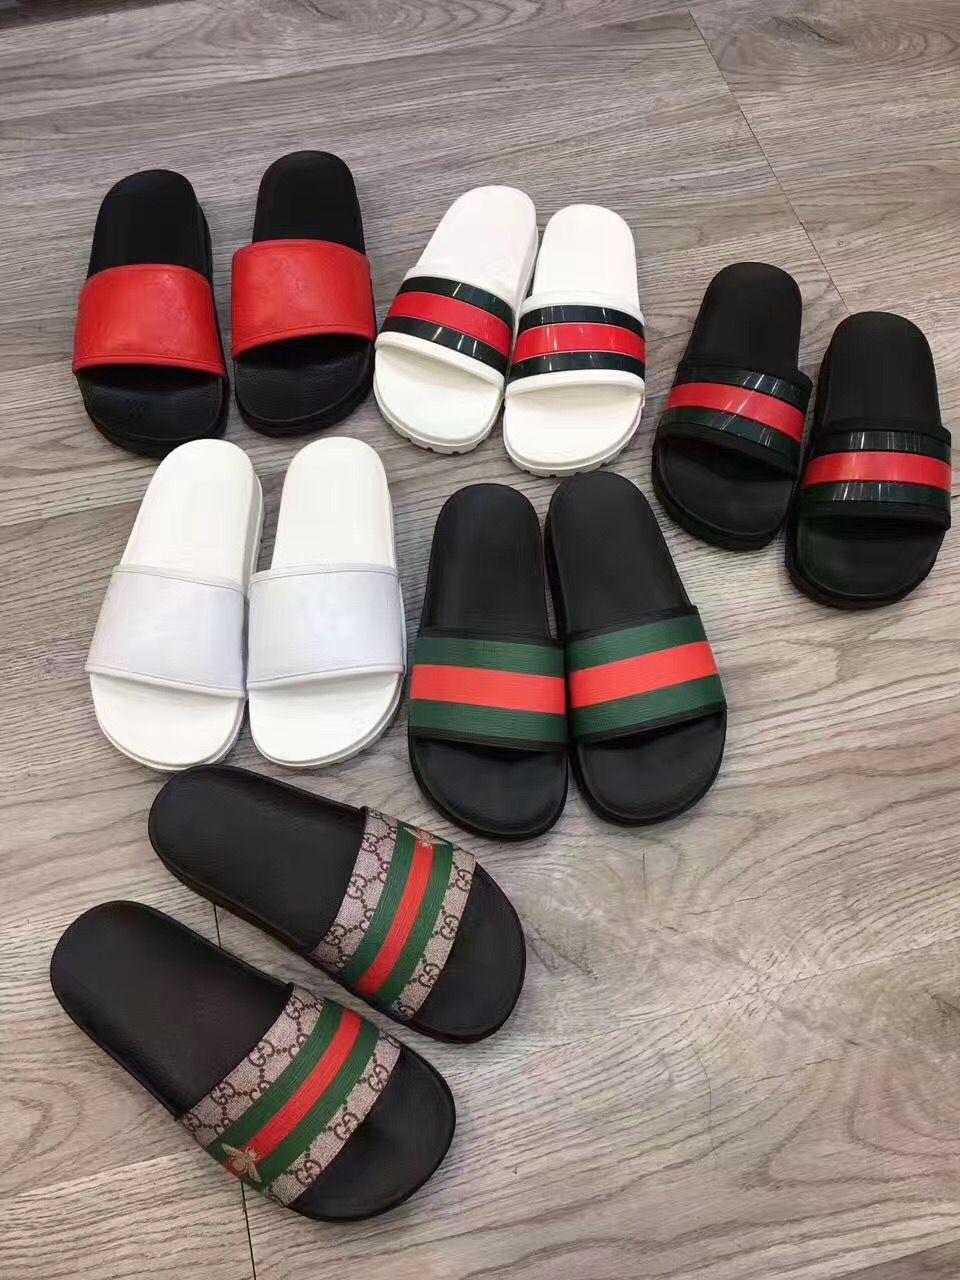 Gucci man shoes casual slippers slides. Accessories